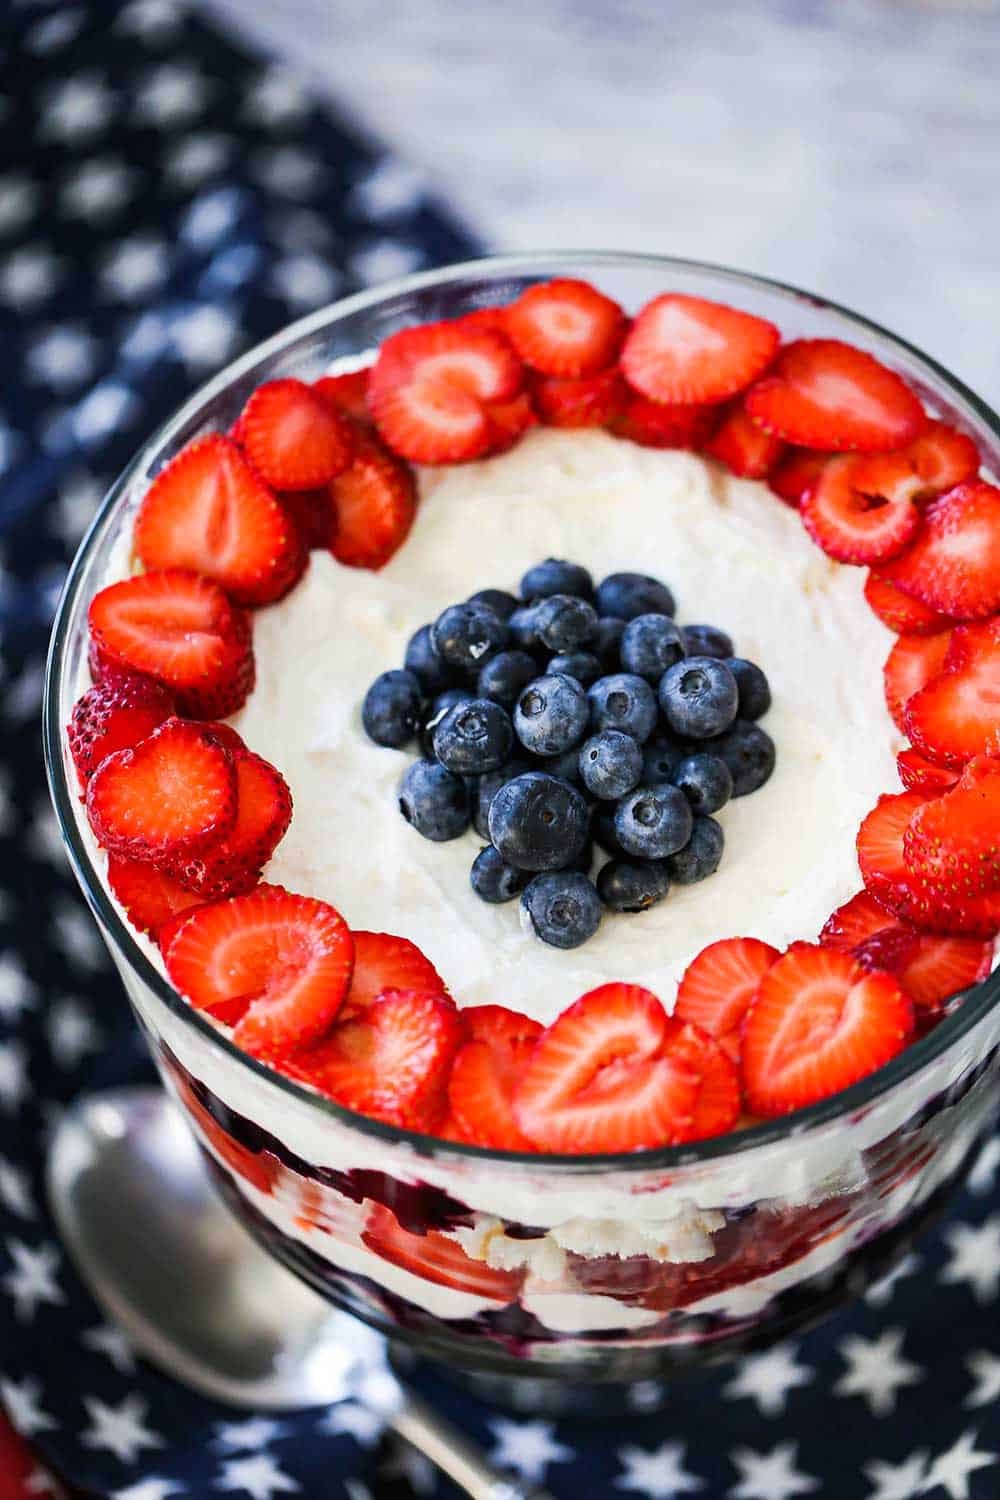 The top of a red, white, and blue trifle that is garnished with an outer circle of fresh, sliced strawberries, and then a pile of fresh blueberries in the center, all sitting on white cream sauce.